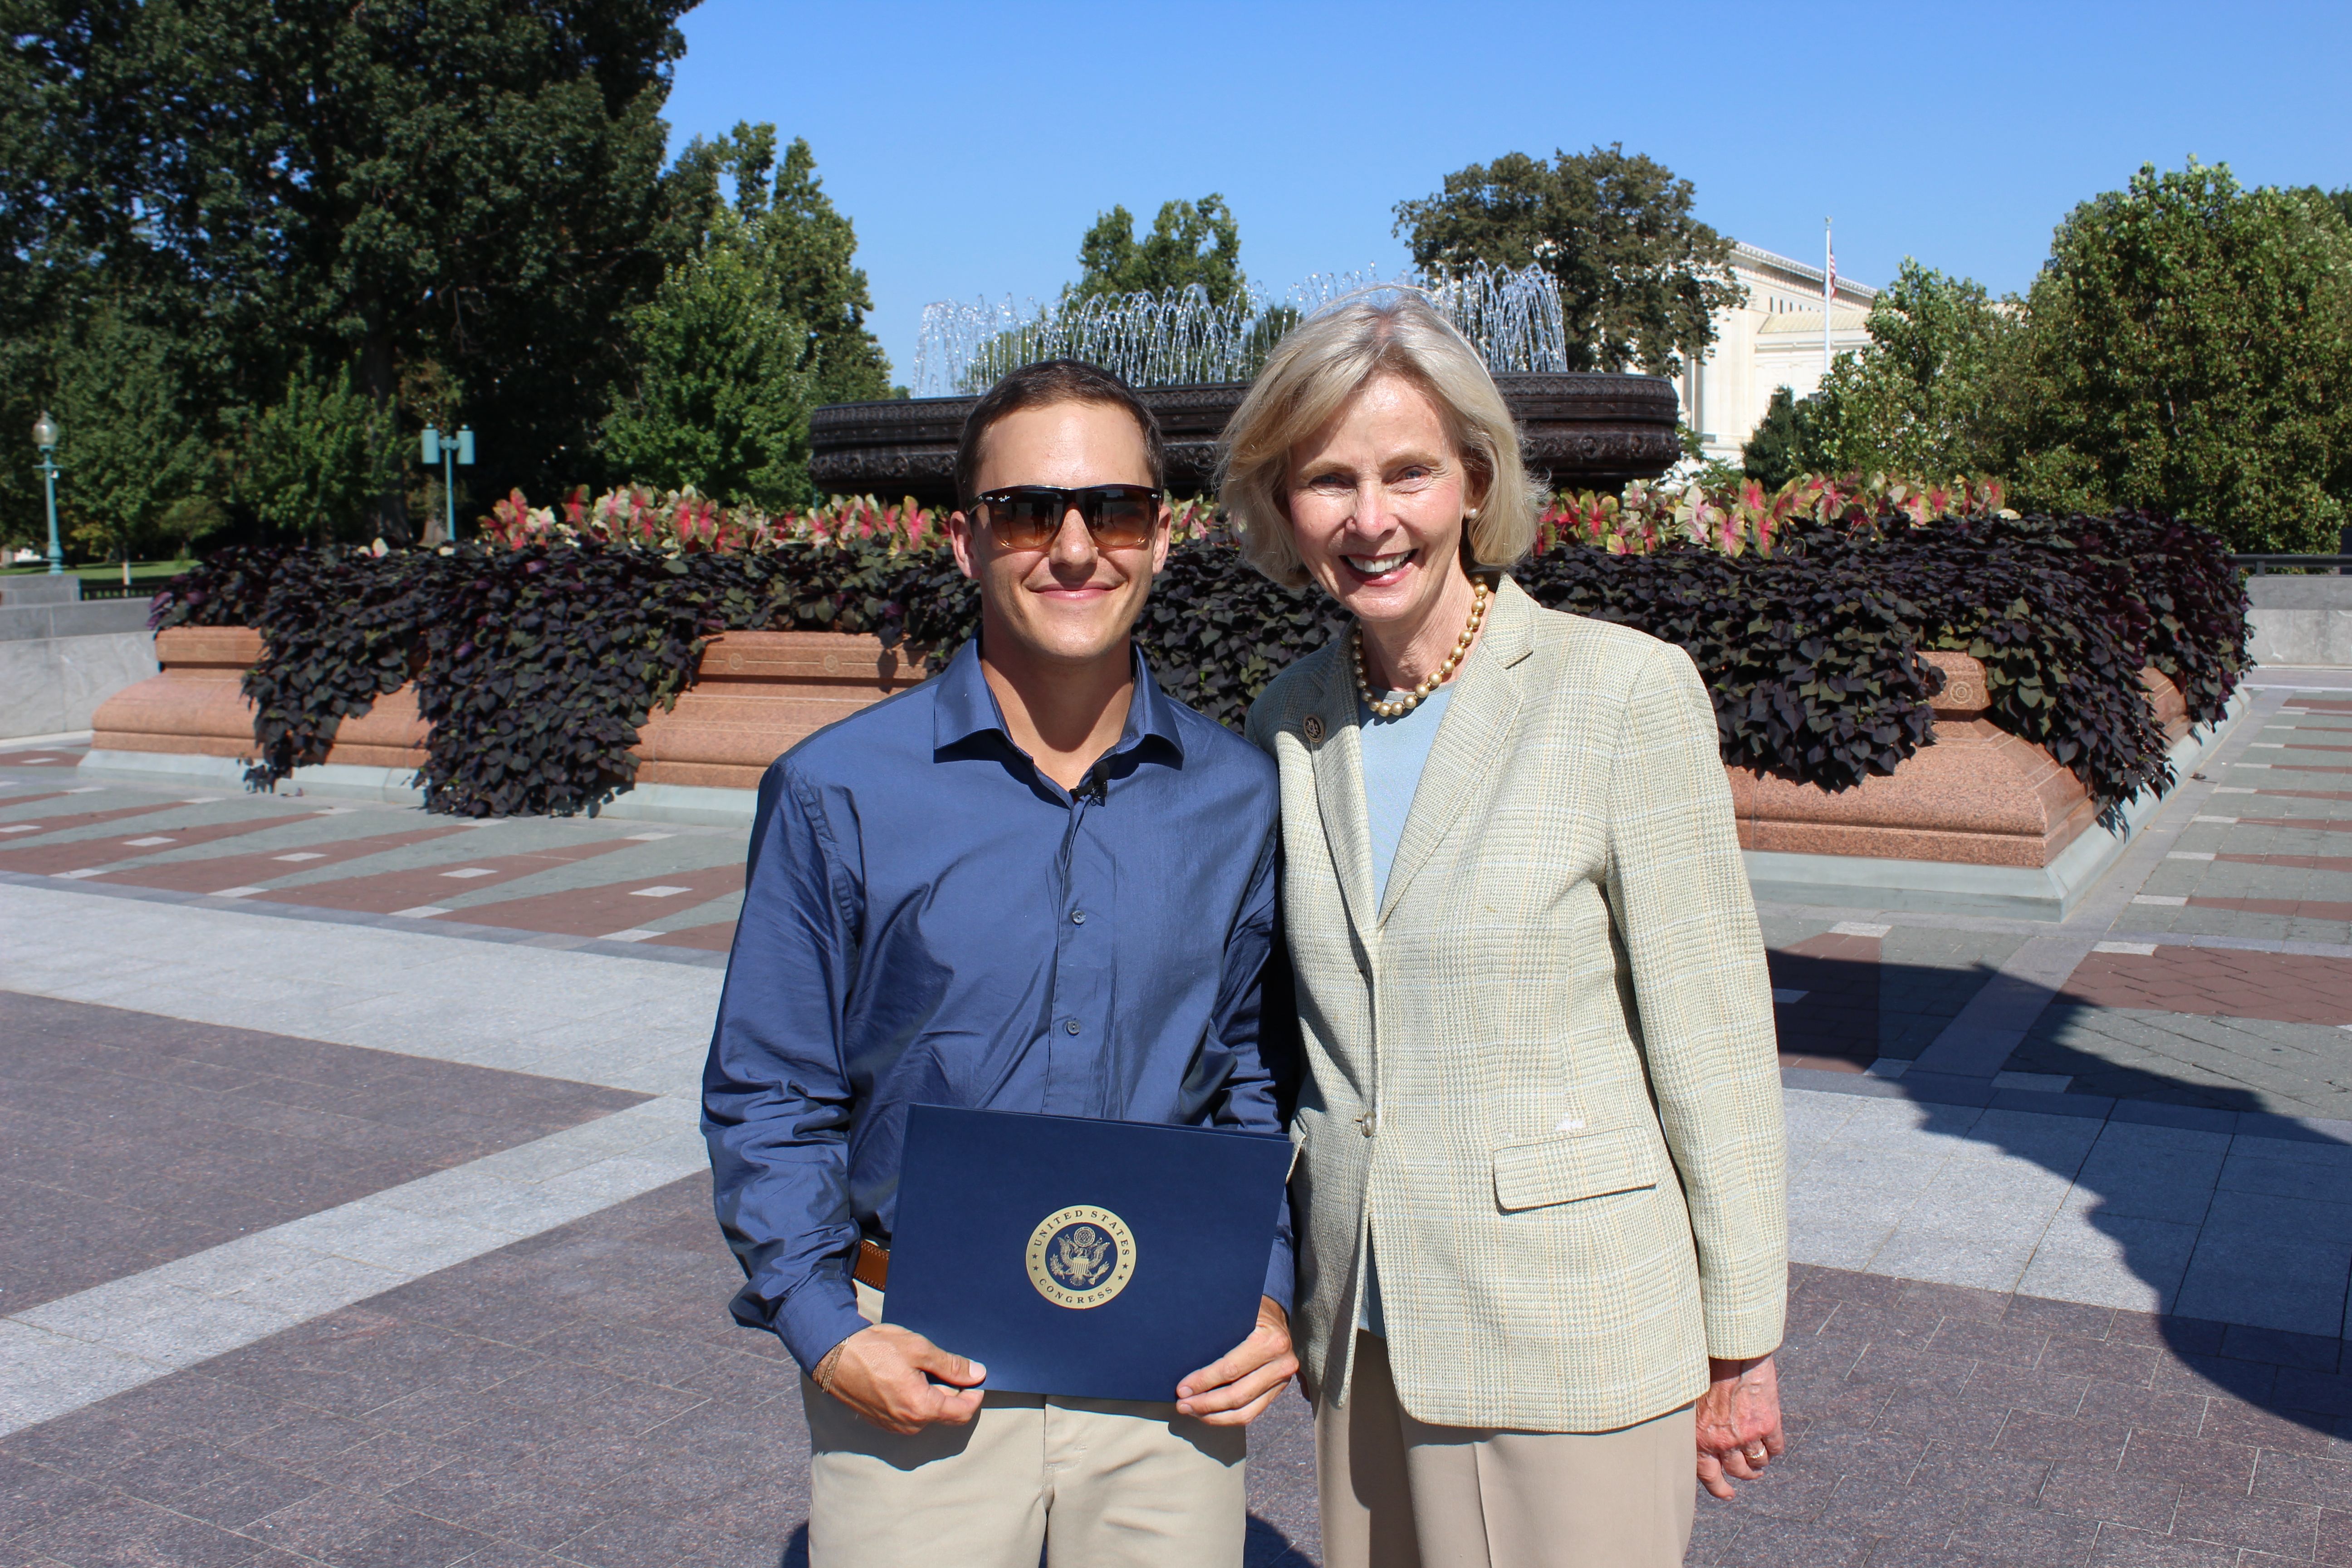 Taylor Lancaster receives a Congressional Award for his trek from Congress member Lois Capps